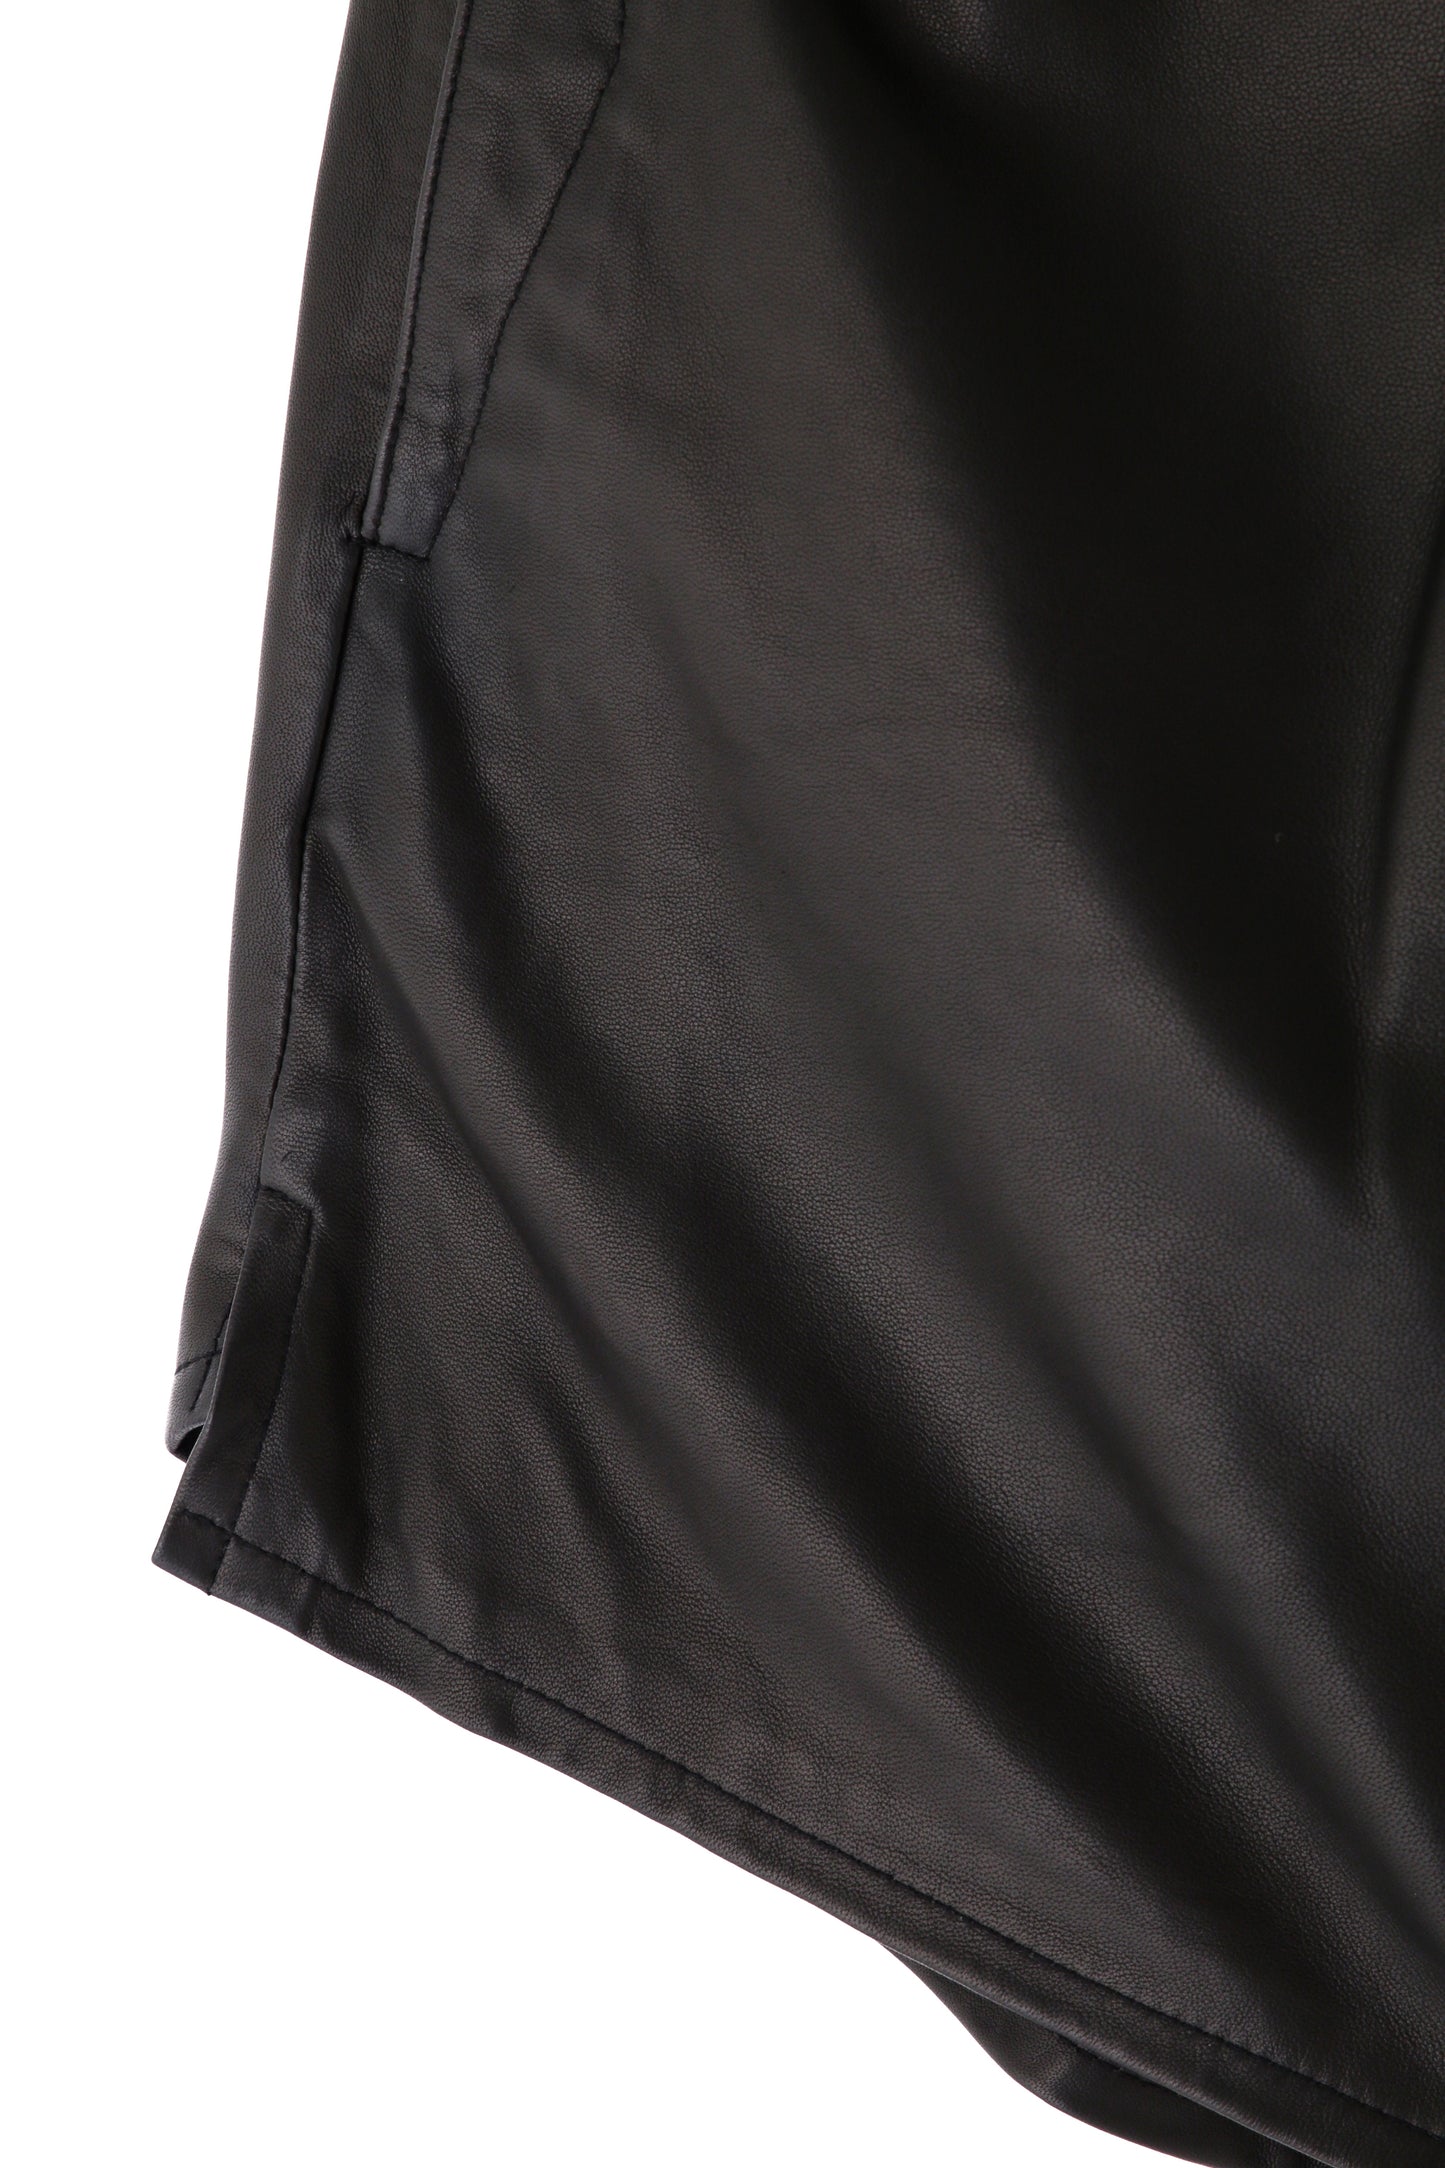 LEATHER SHORT PANTS -Sheep leather-